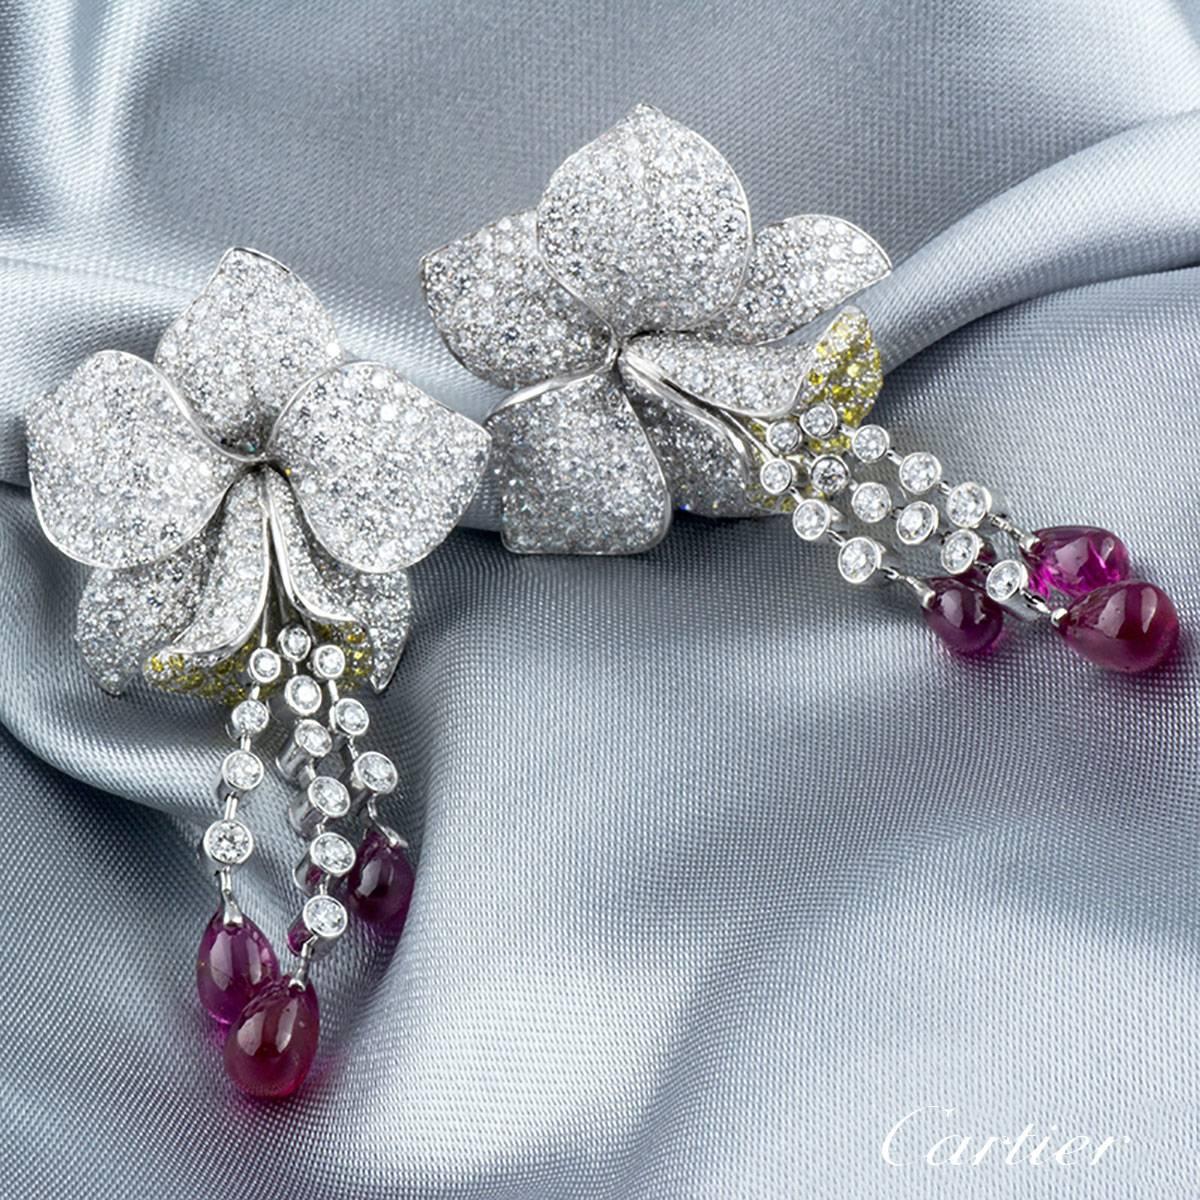 A luxurious and extremely rare pair of platinum Cartier earrings from the Caresse D' Orchidees collection. Each earring comprises of an Orchid motif with 5 petals embellished with round brilliant cut diamonds. The lip of the orchid is detailed with